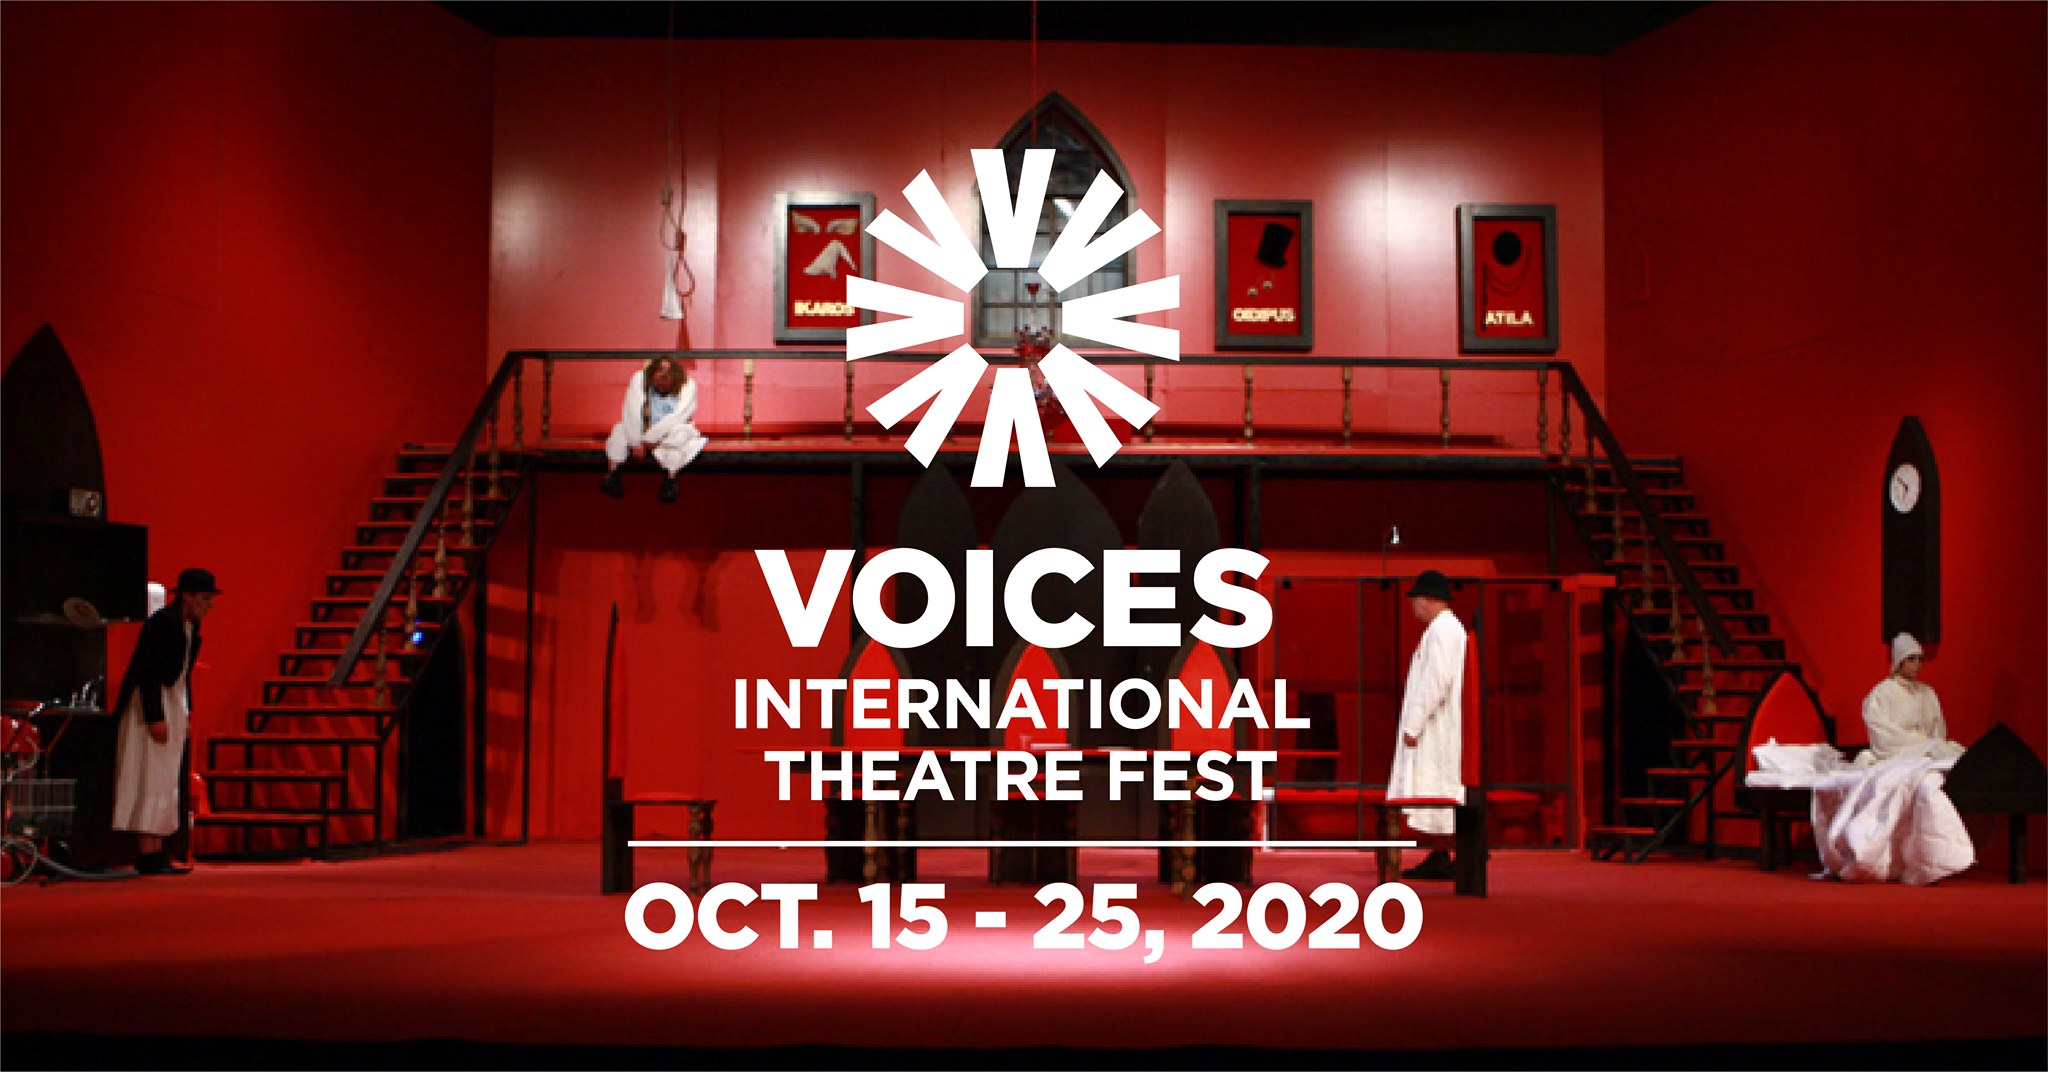 2020 VOICES International Theatre Fest Flyer Red lighted Stage with white wordage detailing event